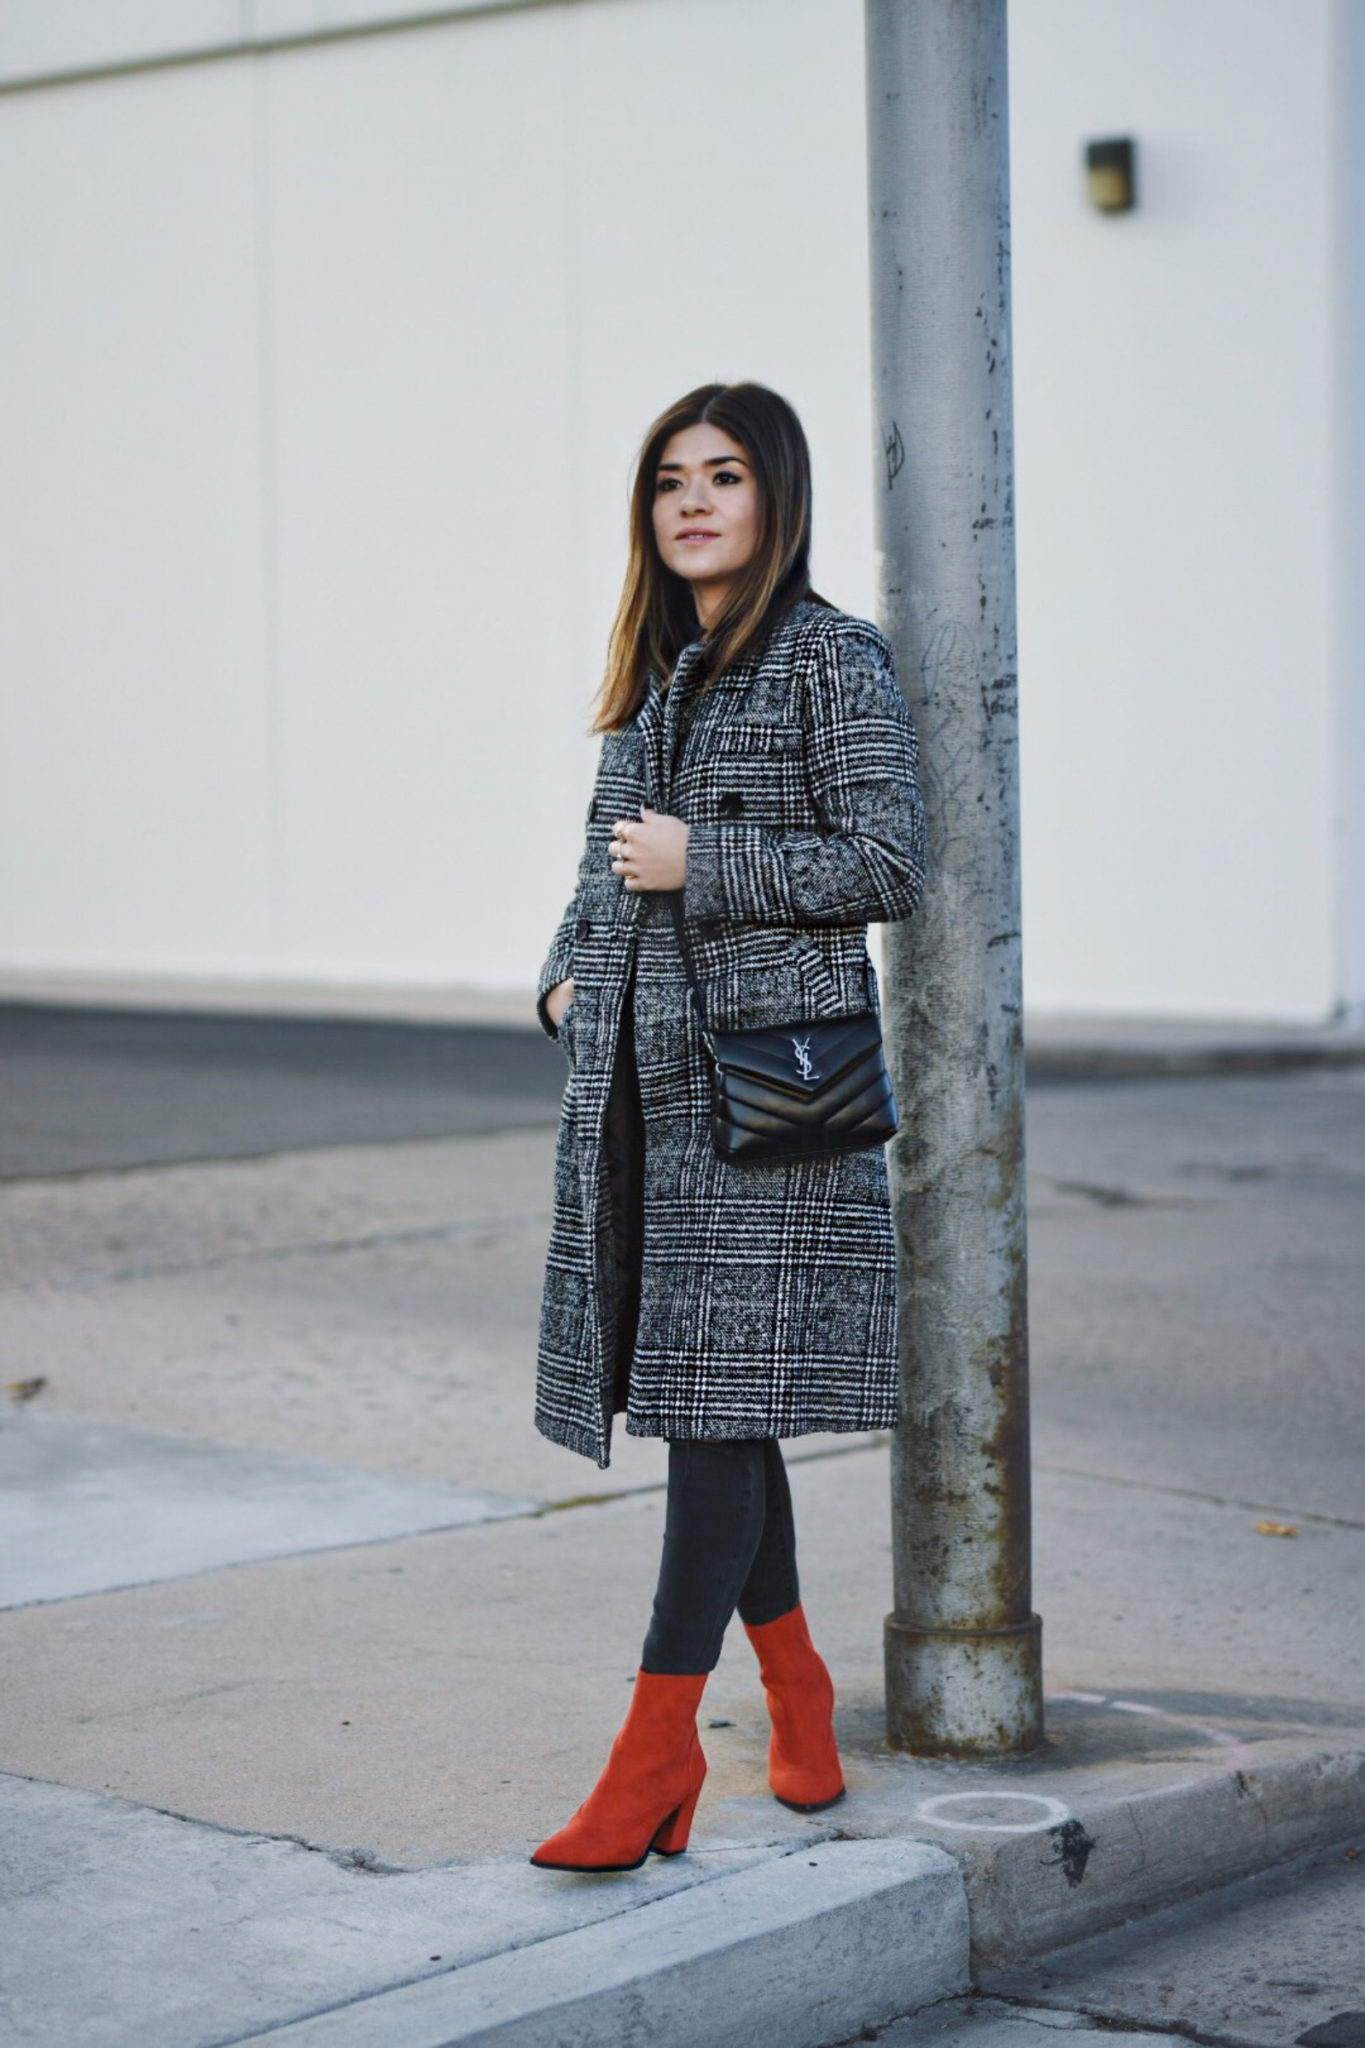 HOW TO STYLE RED BOOTS | CHIC TALK